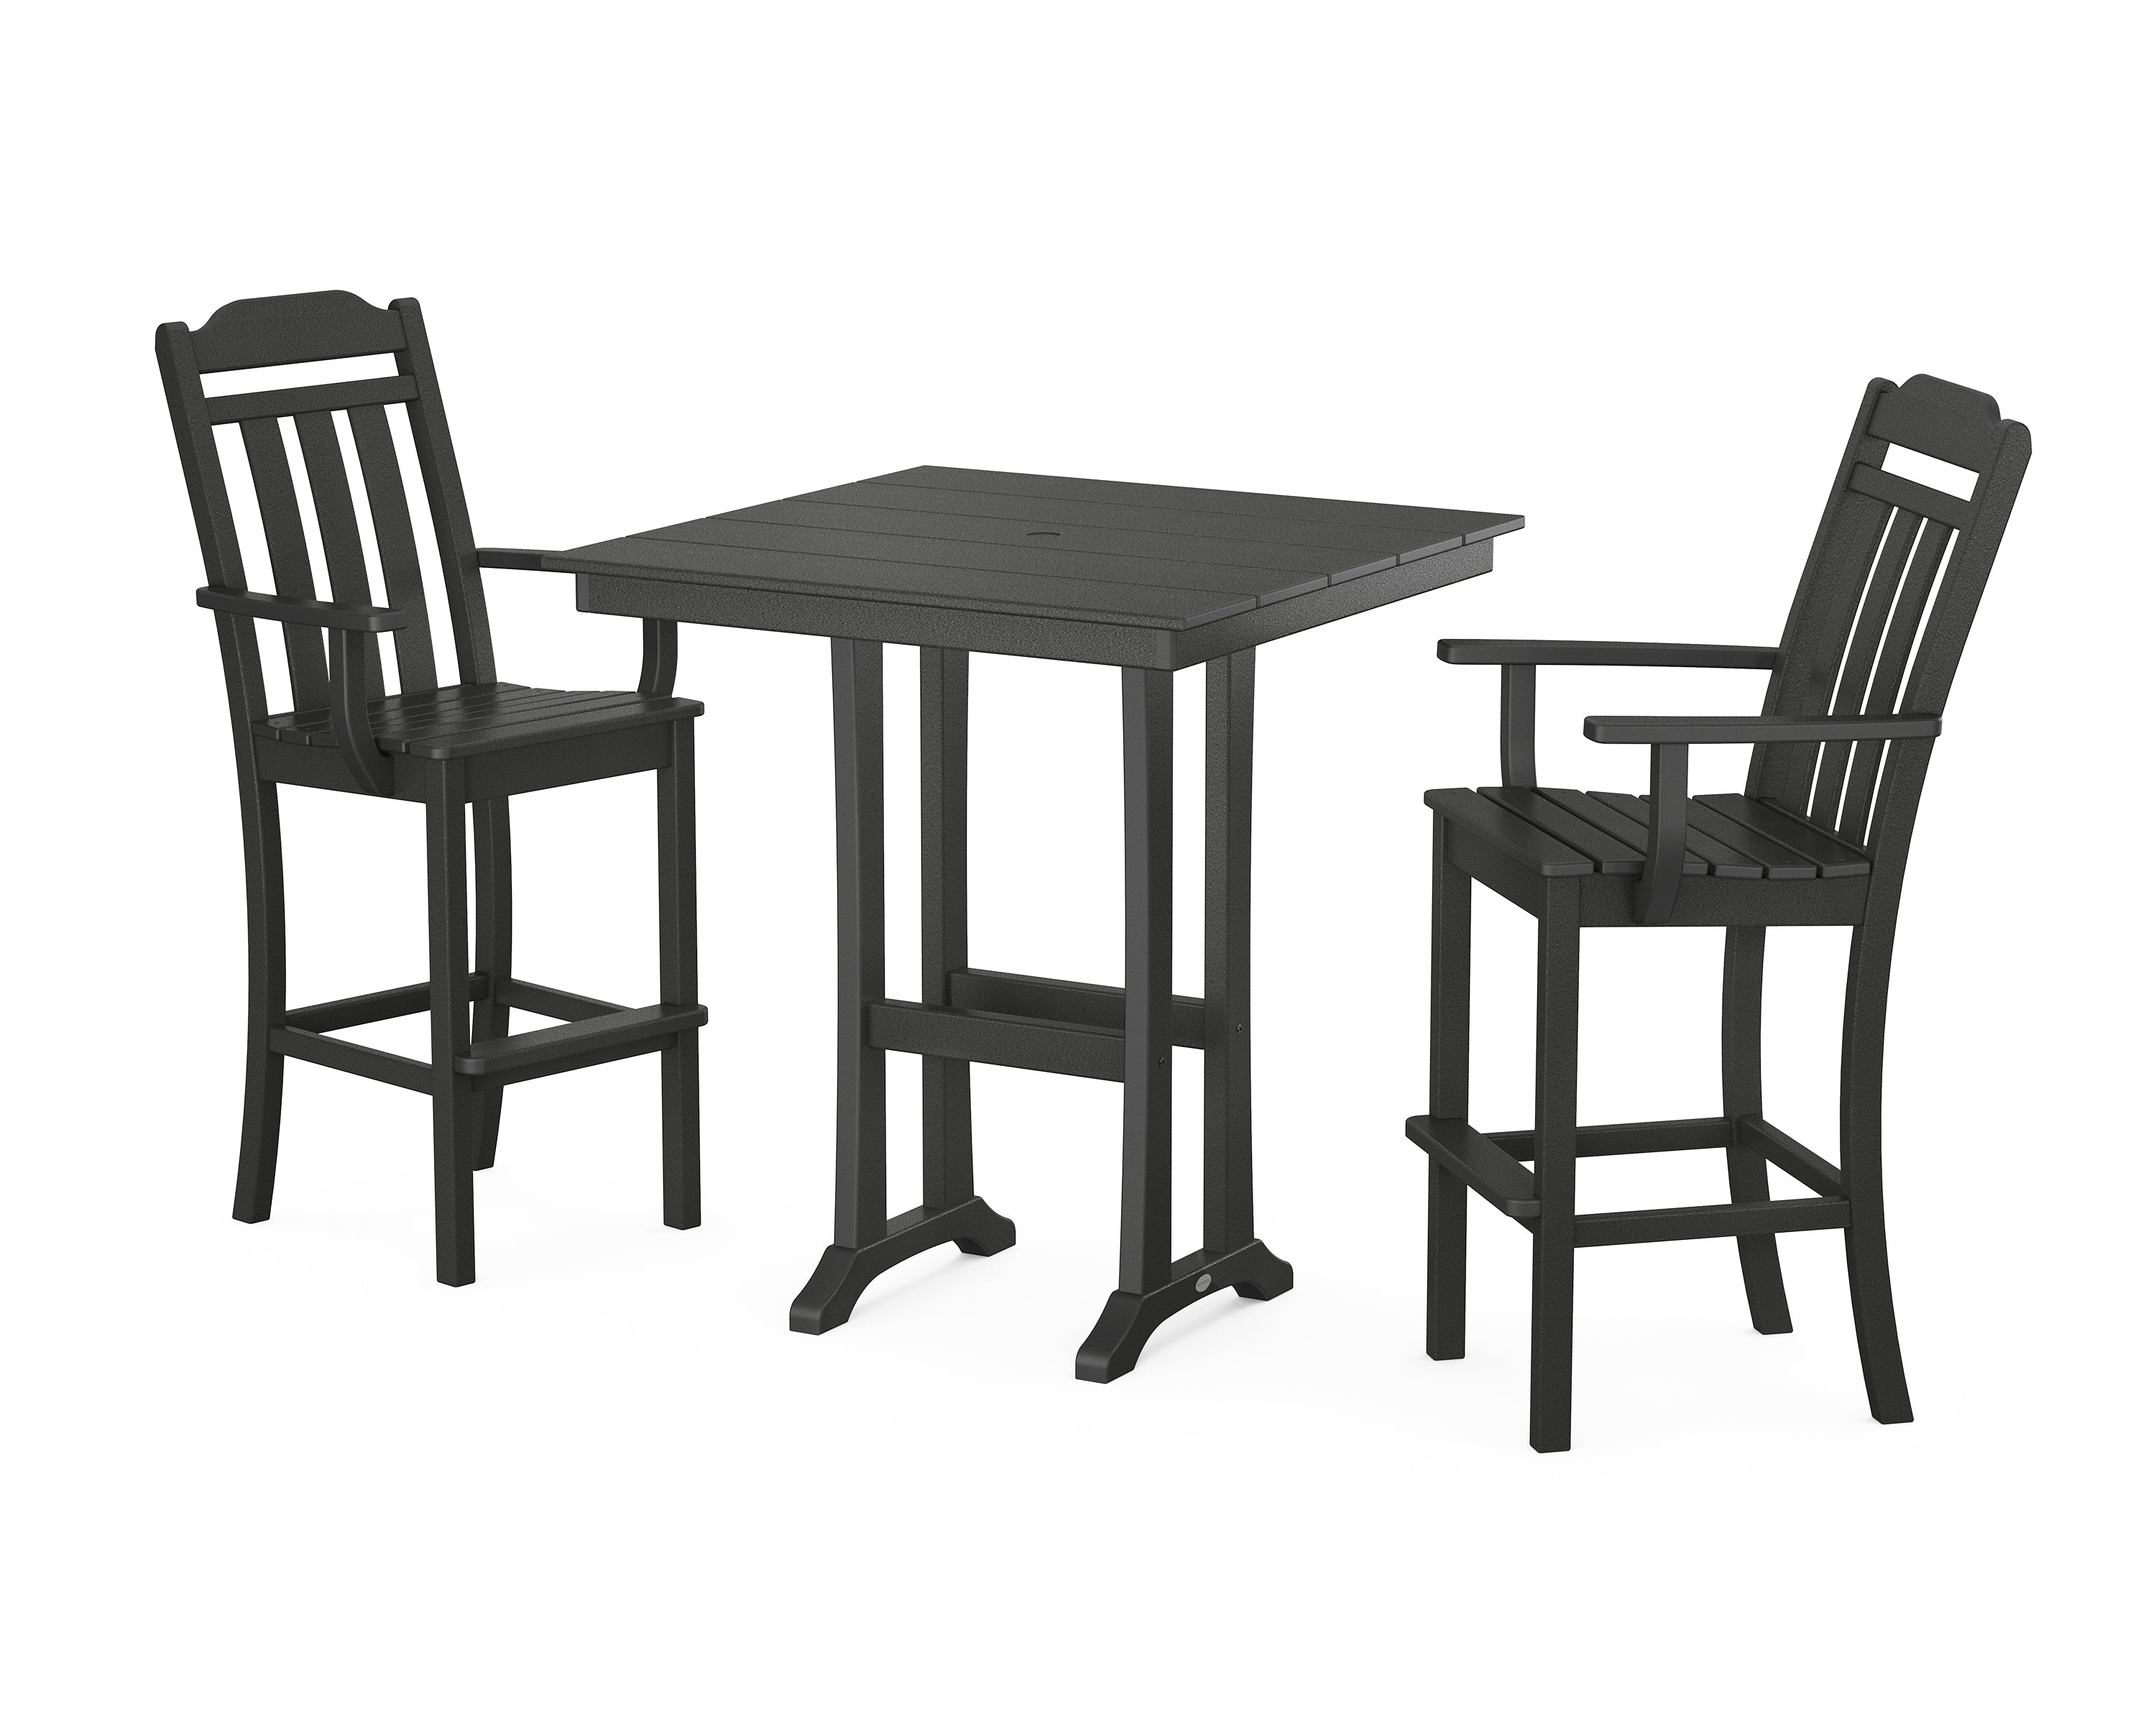 POLYWOOD Country Living 3-Piece Farmhouse Bar Set with Trestle Legs in Black